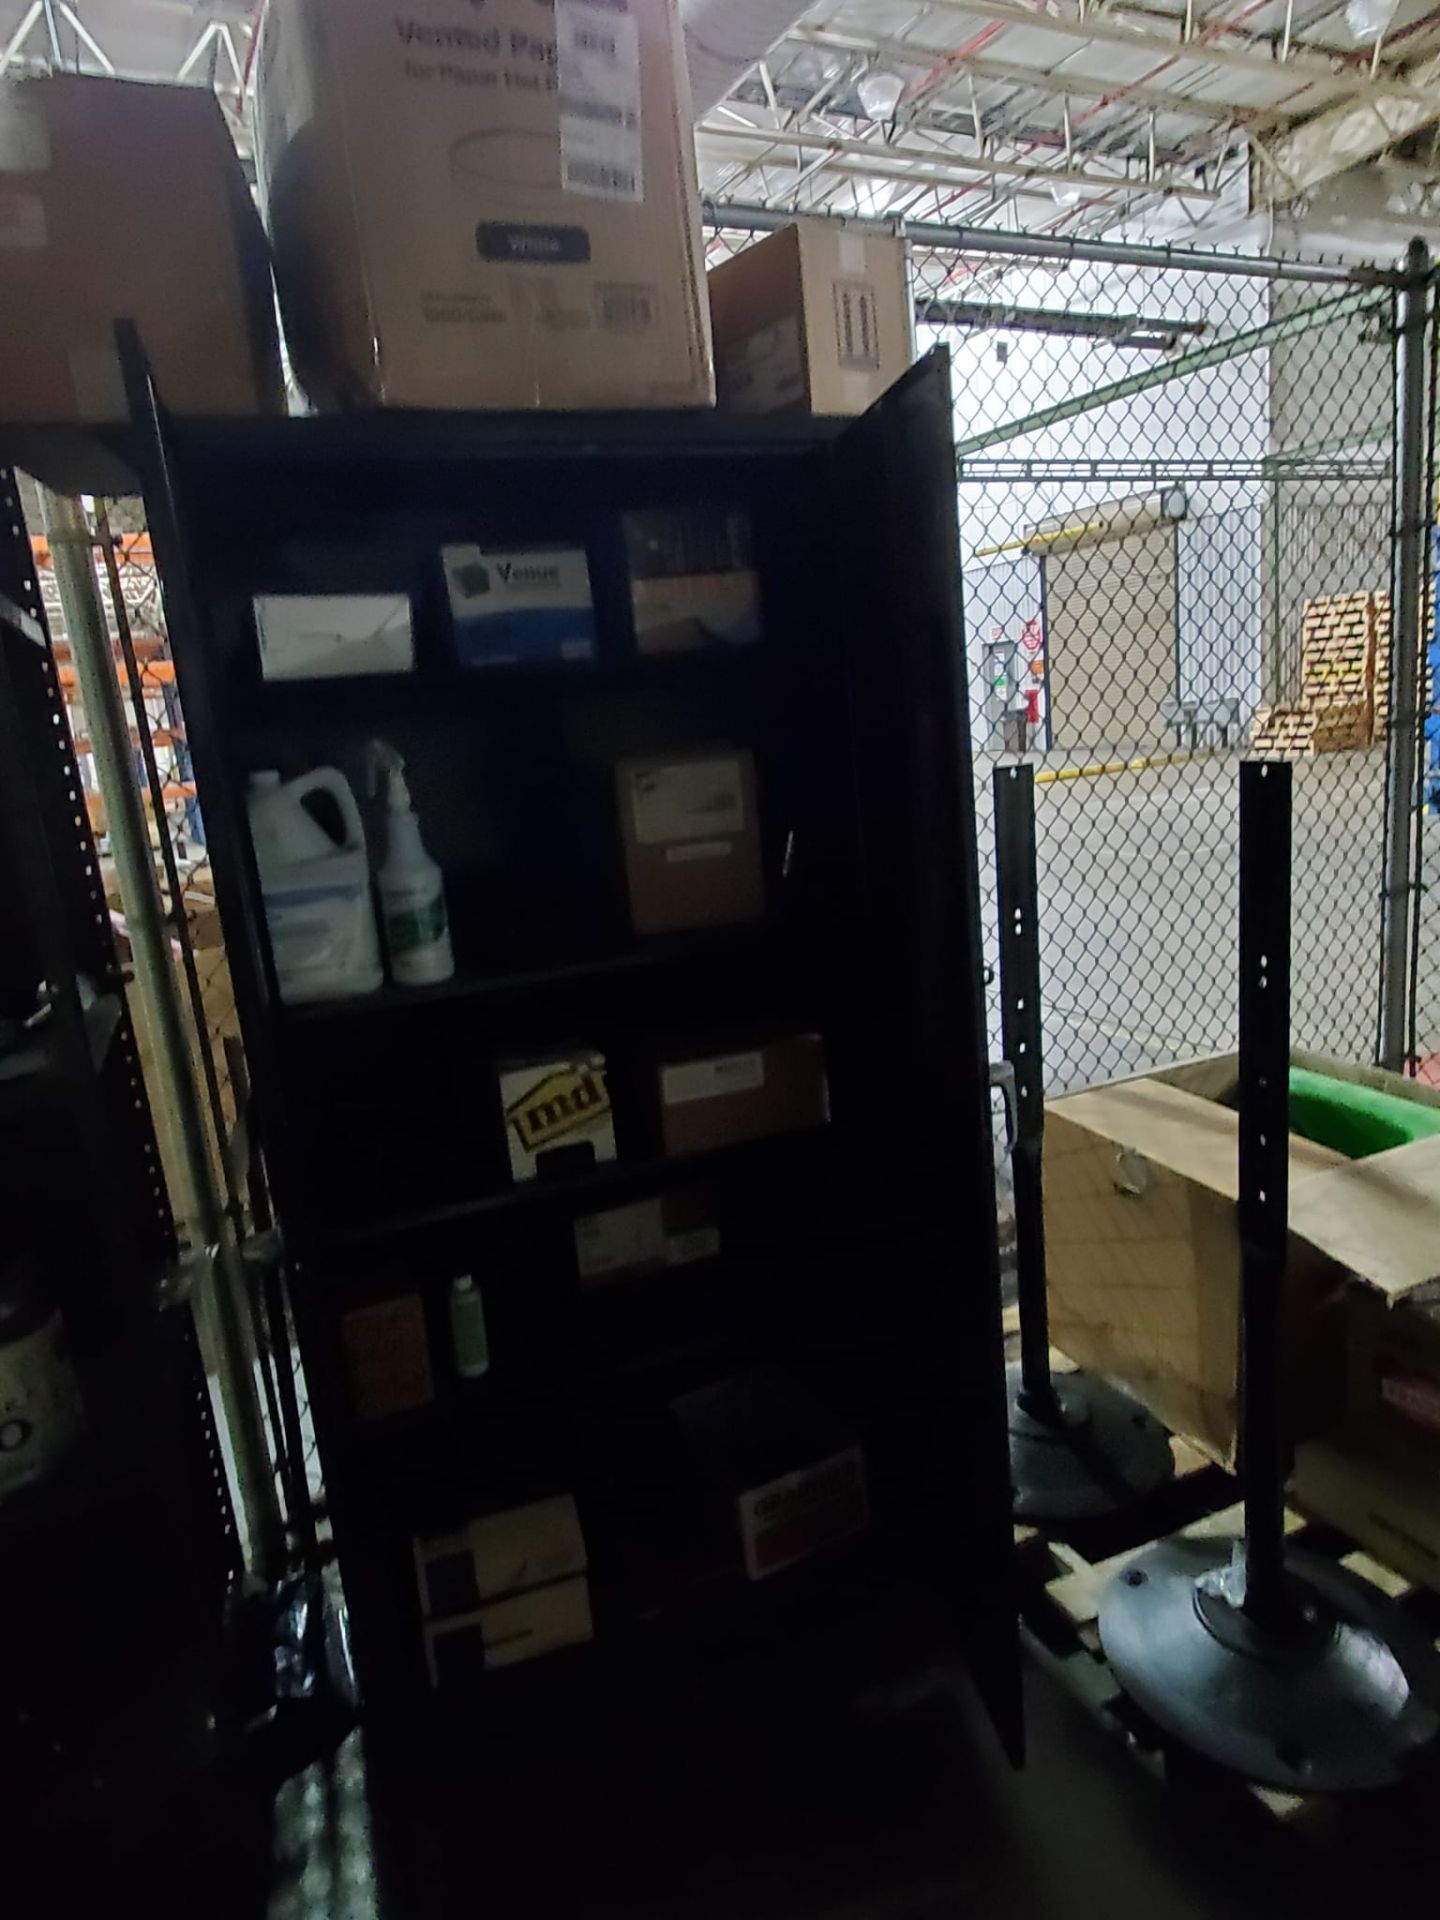 Contents of Supplies Area - Image 7 of 9